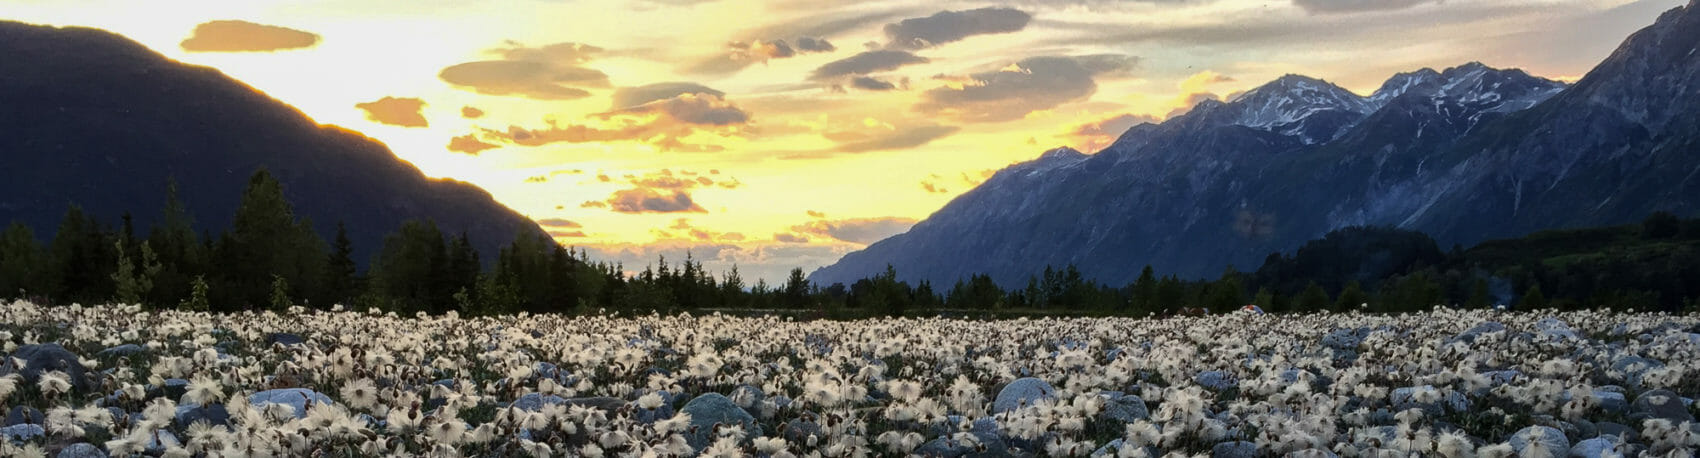 Sunsets in the mountains with dryas flowers in the foreground on the alsek and tatshenshini rivers in Alaska